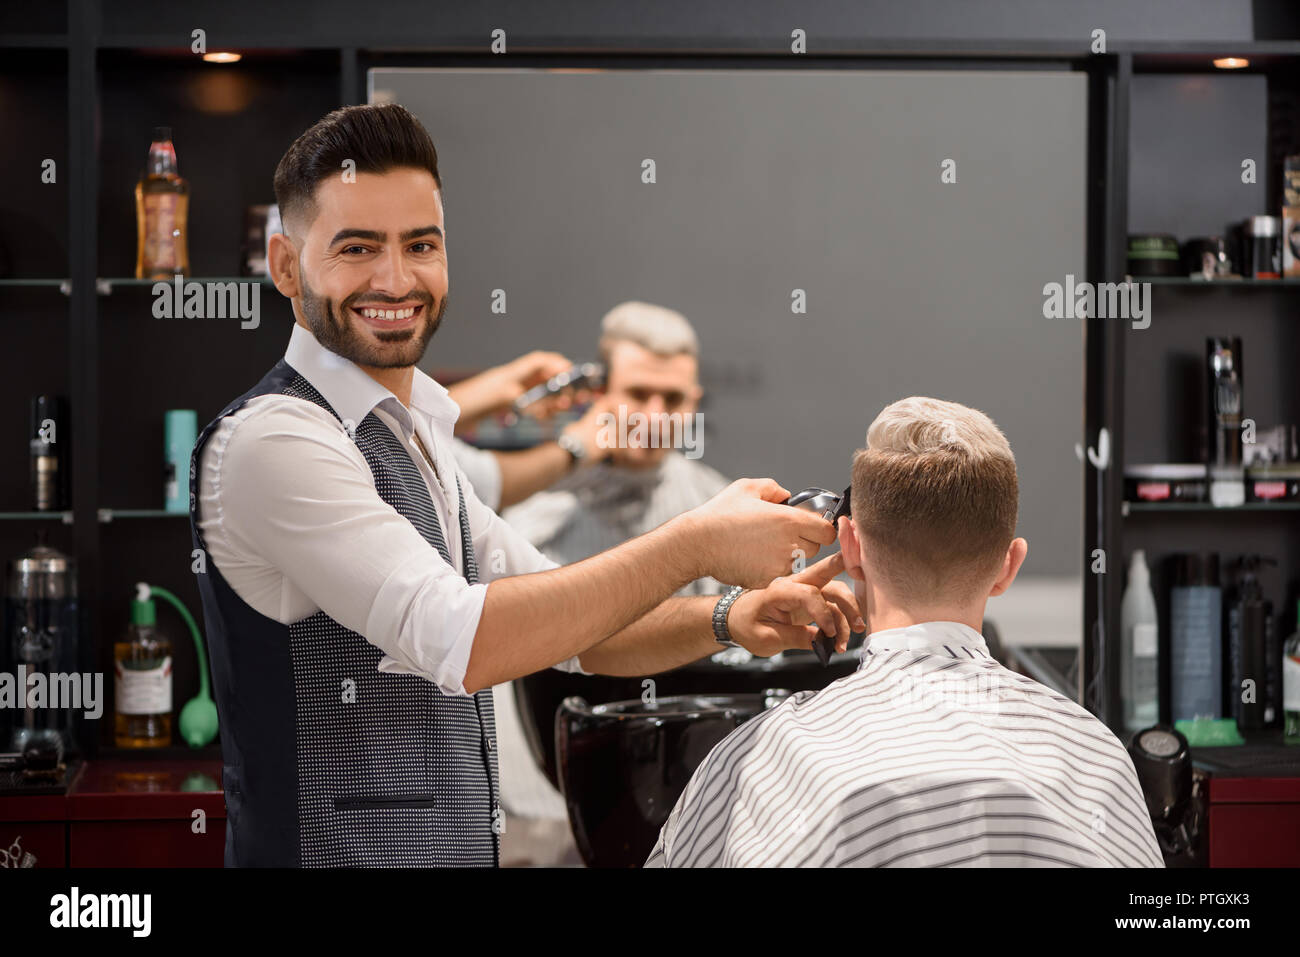 Smiling hairstylist working with client in barbershop. Bearded barber looking at camera and trimming stylish haircut of young man. Reflection in mirror of client covered with coiffure cape. Stock Photo